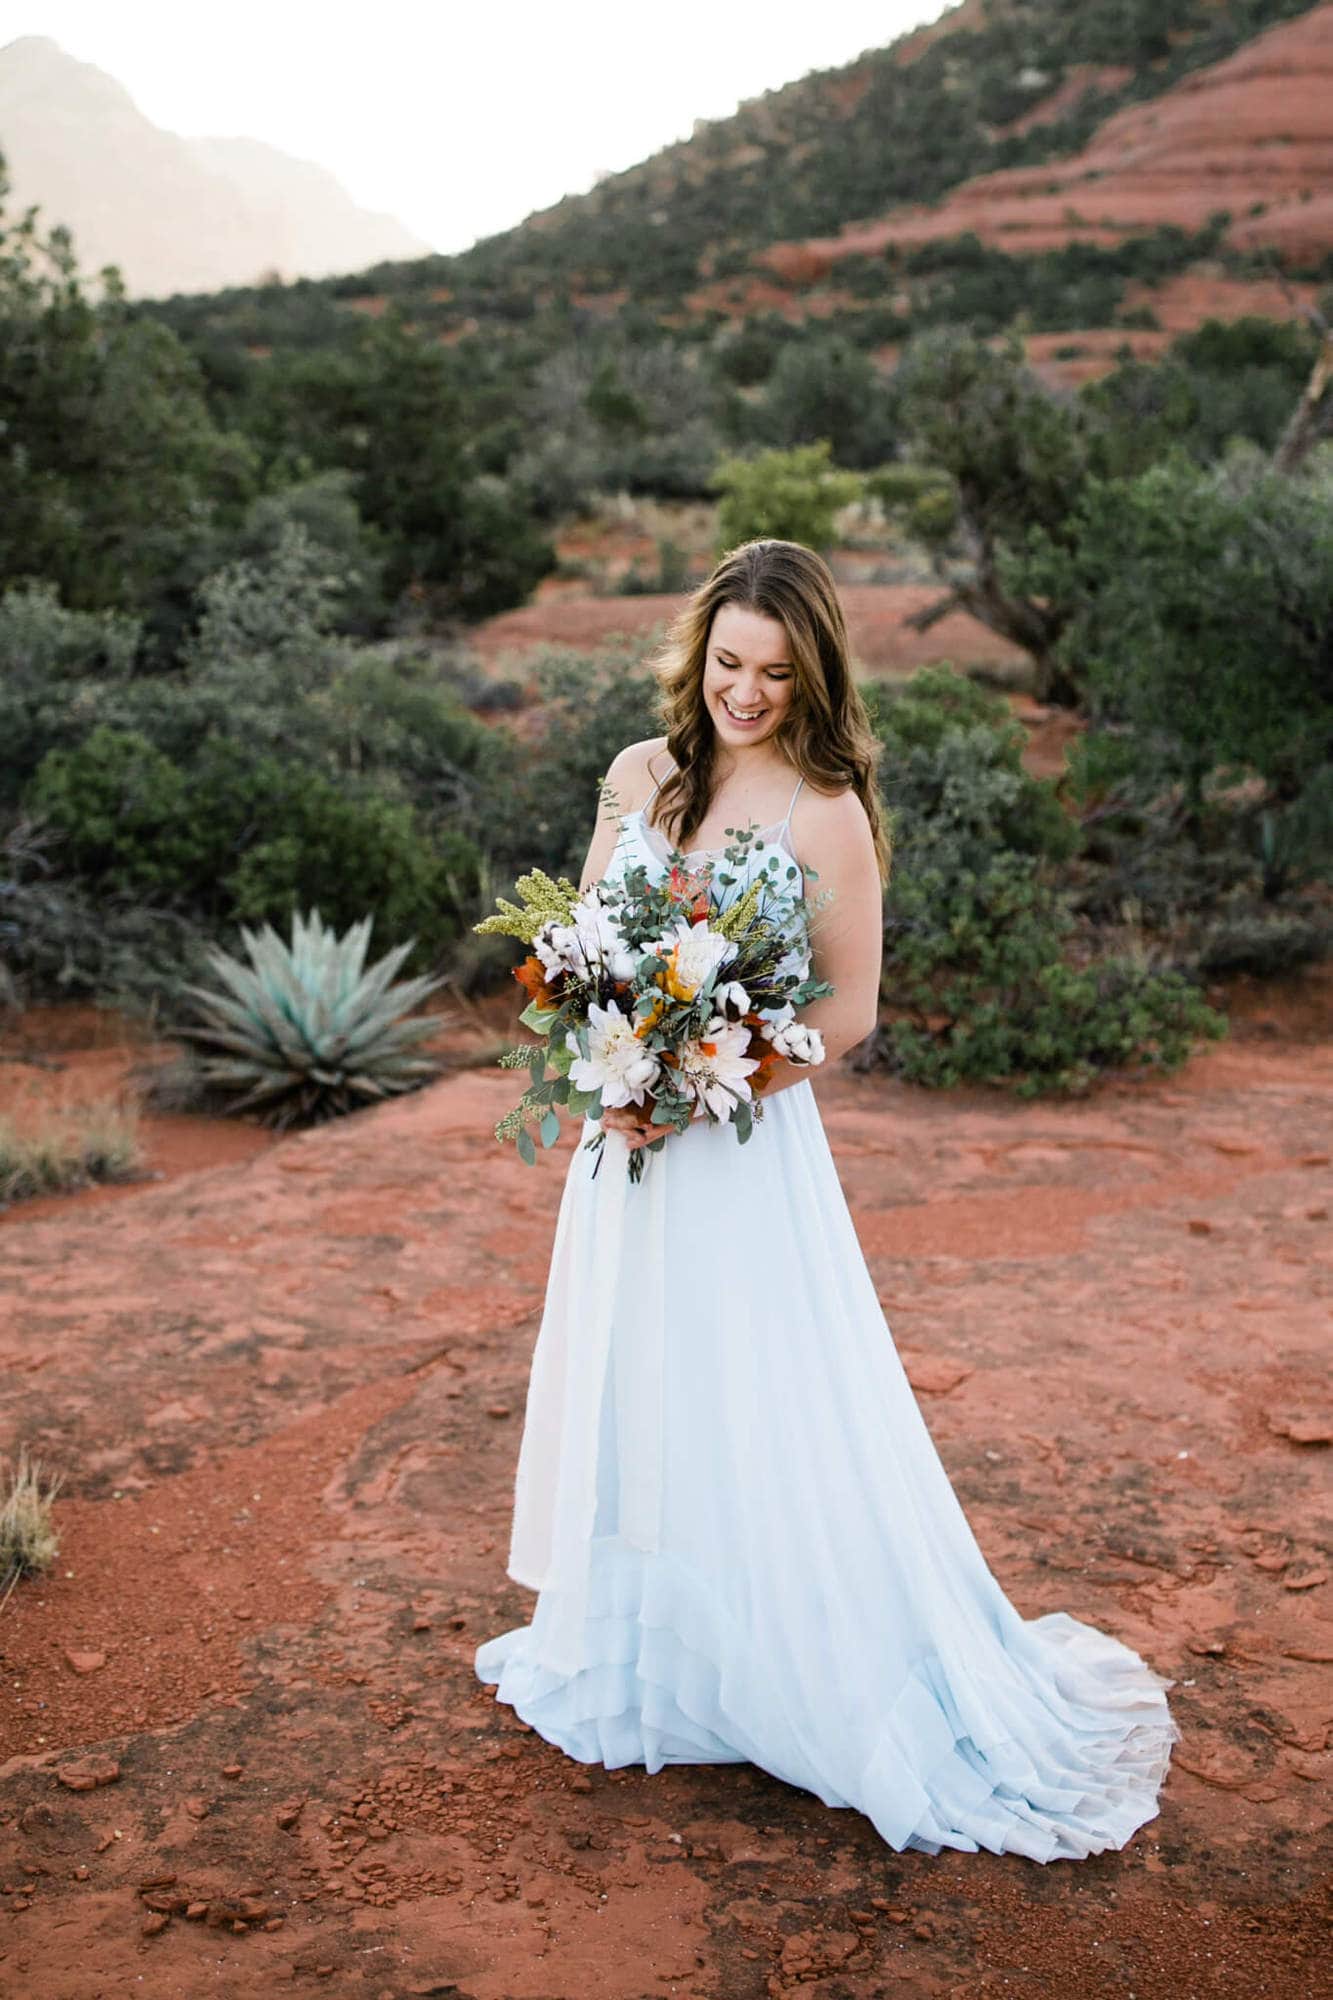 The bride poses for a bridal portrait, holding her bouquet and laughing.